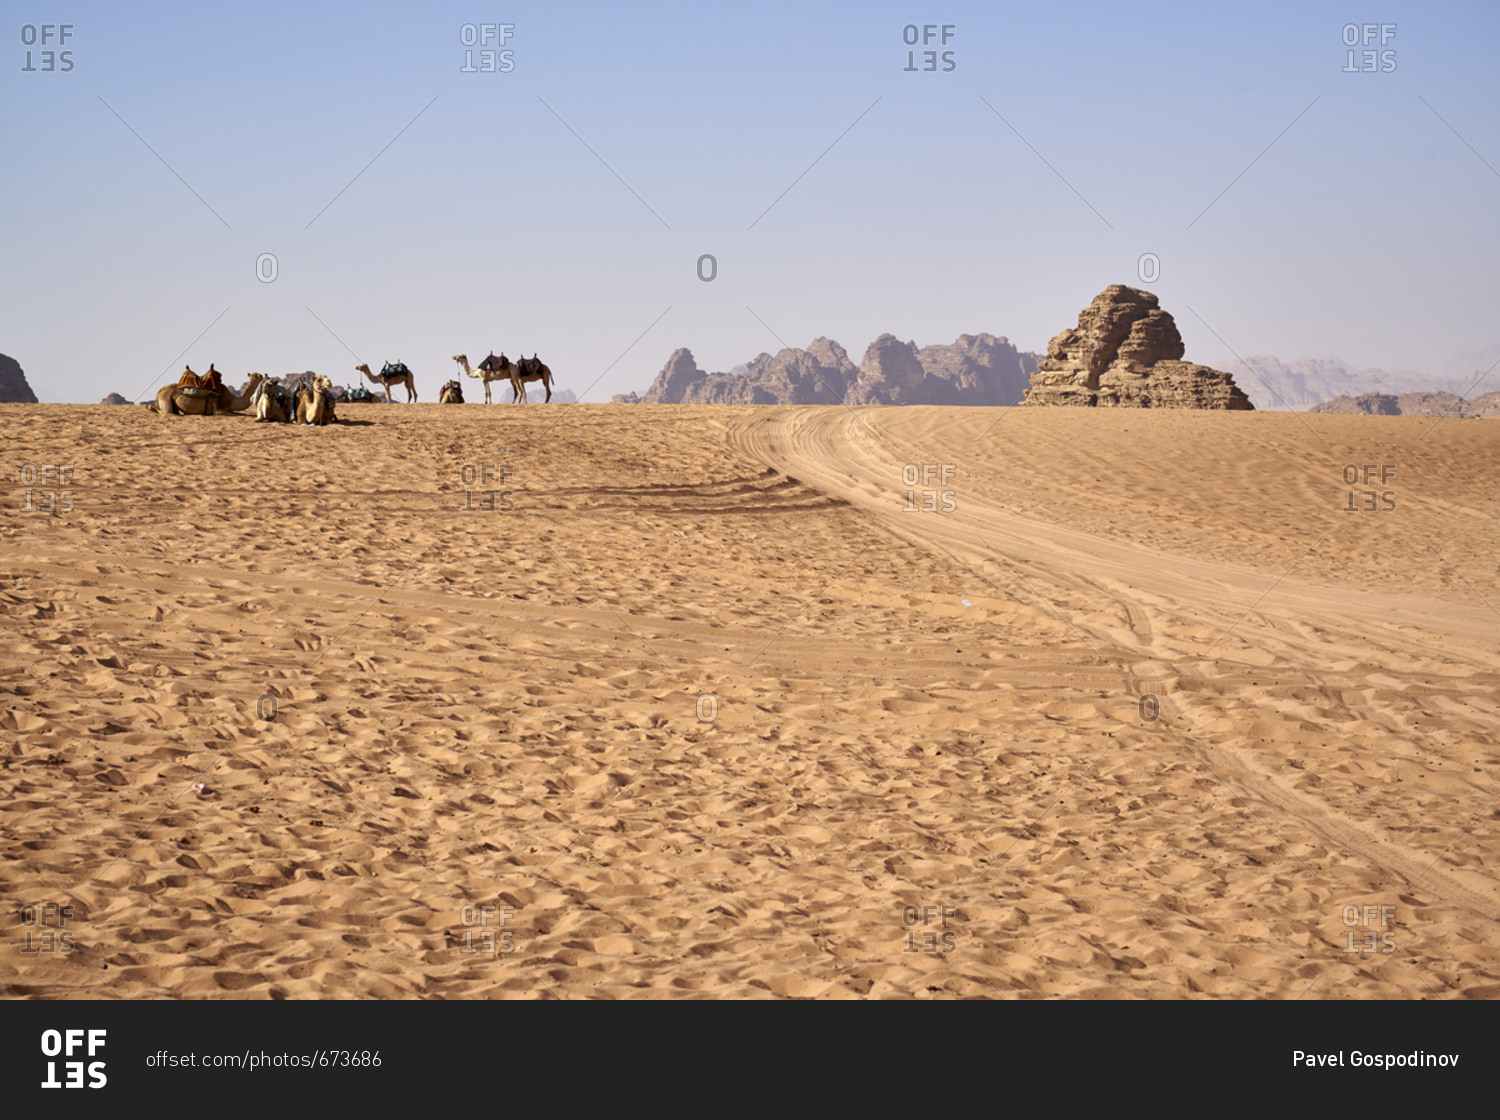 Group of camels in Wadi Rum (The Valley of the Moon), a protected desert wilderness in Jordan